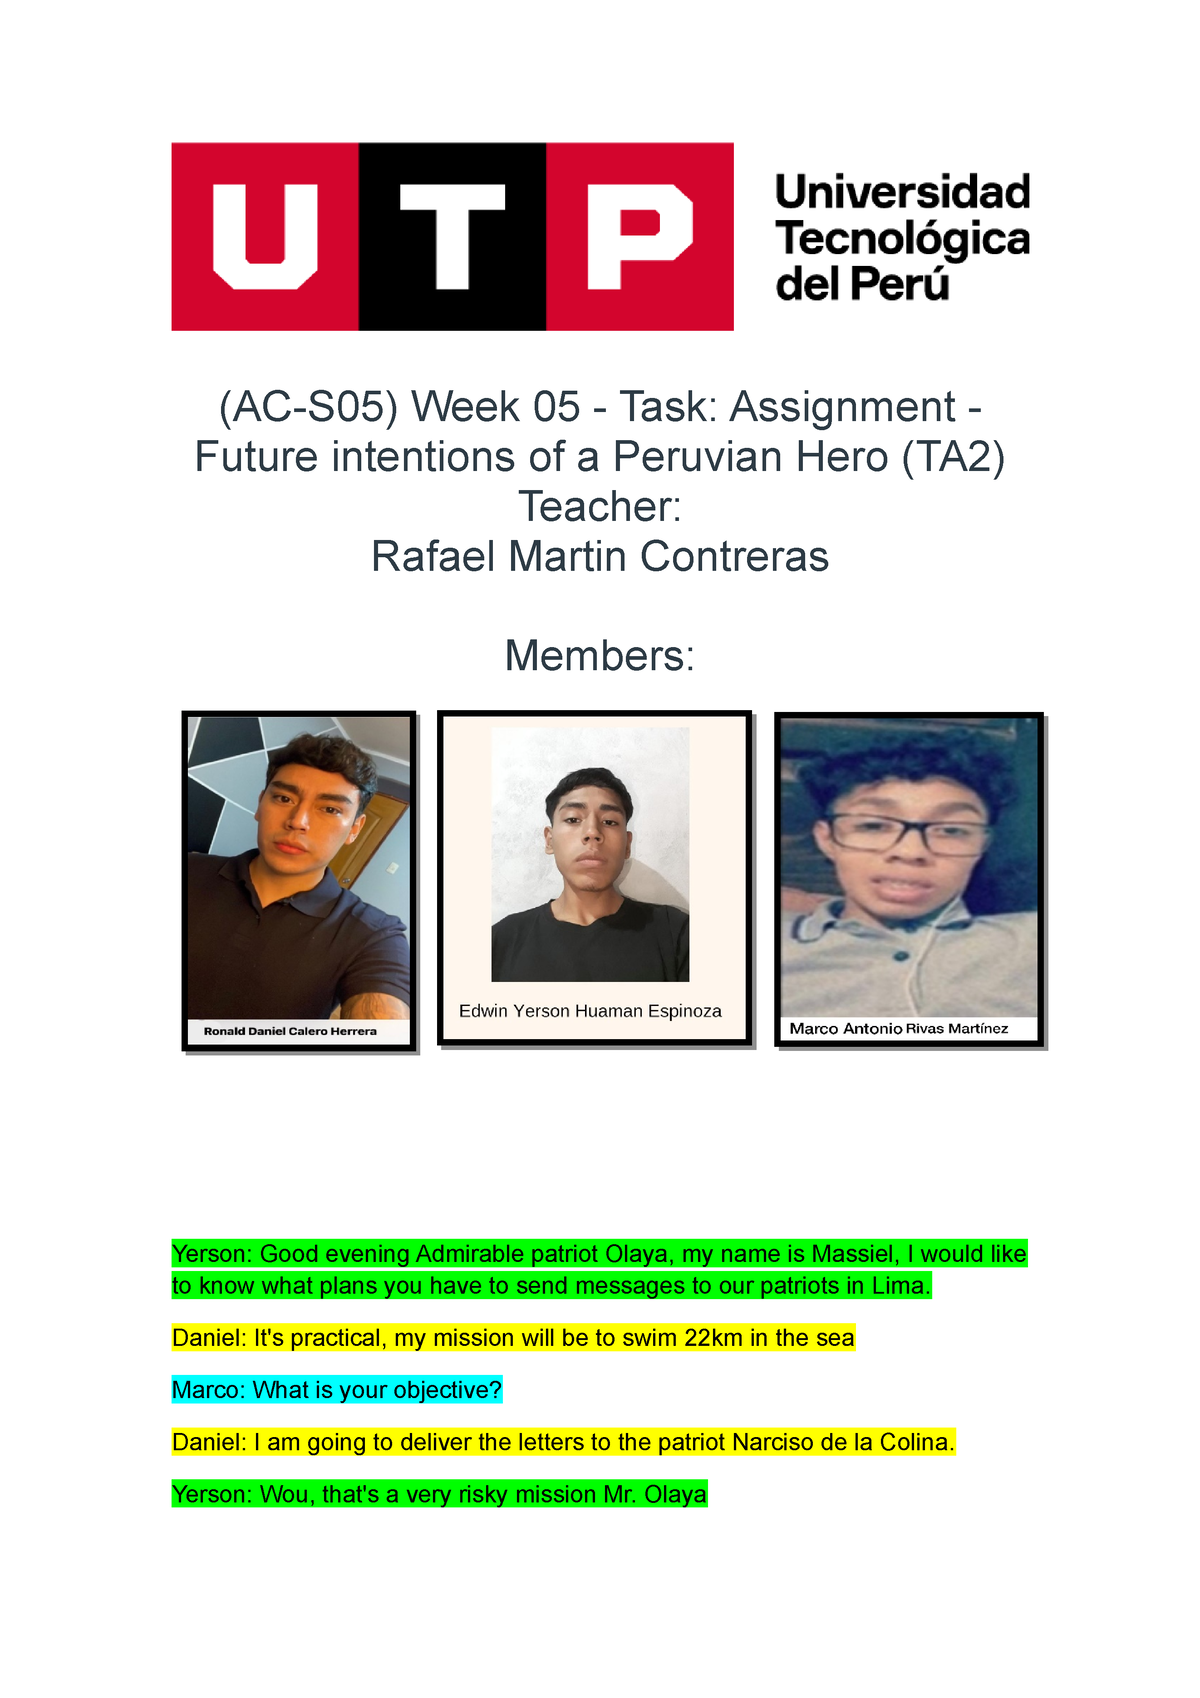 task assignment future intentions of a peruvian hero